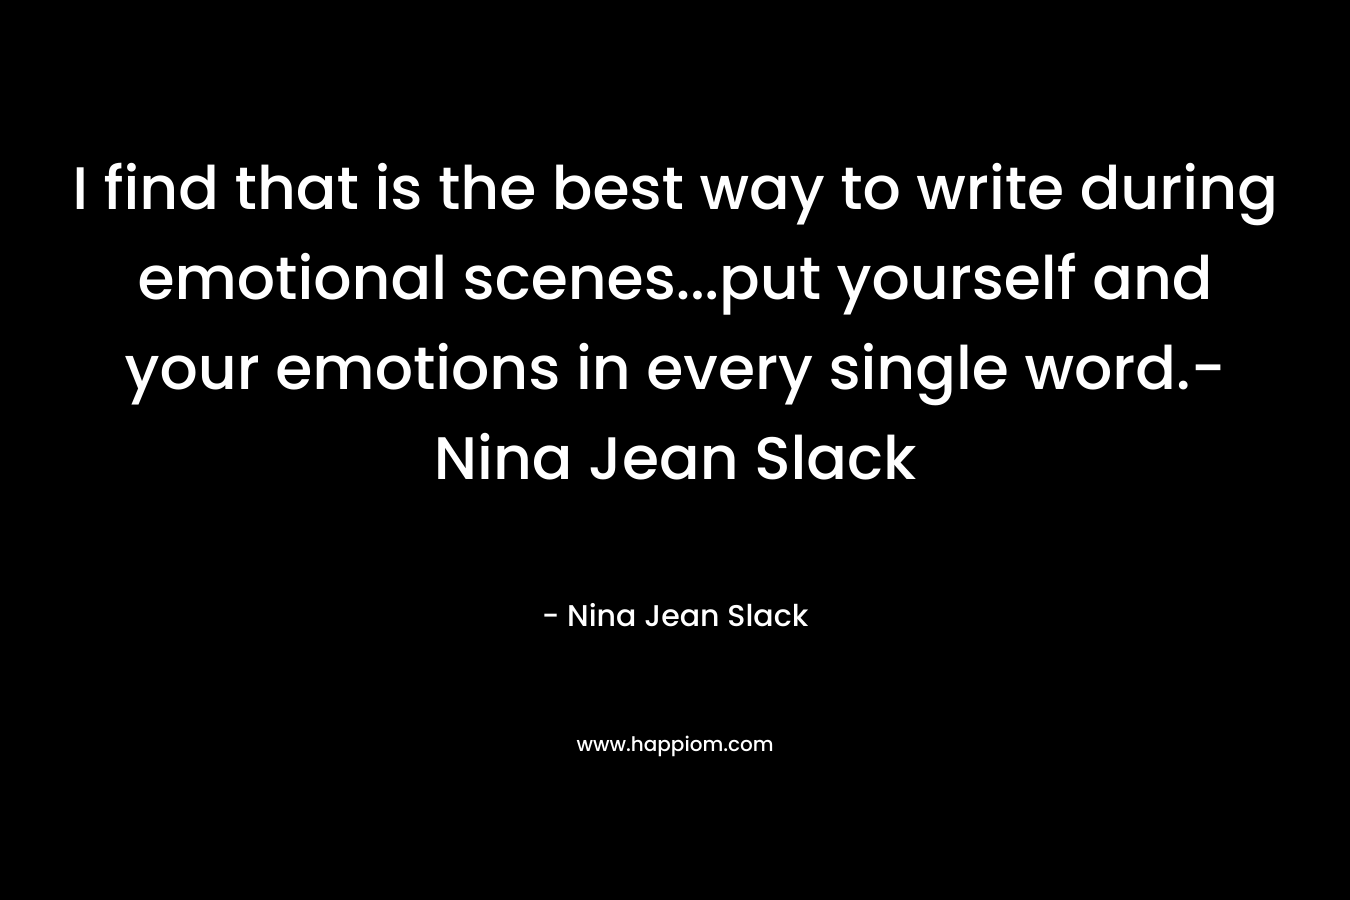 I find that is the best way to write during emotional scenes...put yourself and your emotions in every single word.-Nina Jean Slack